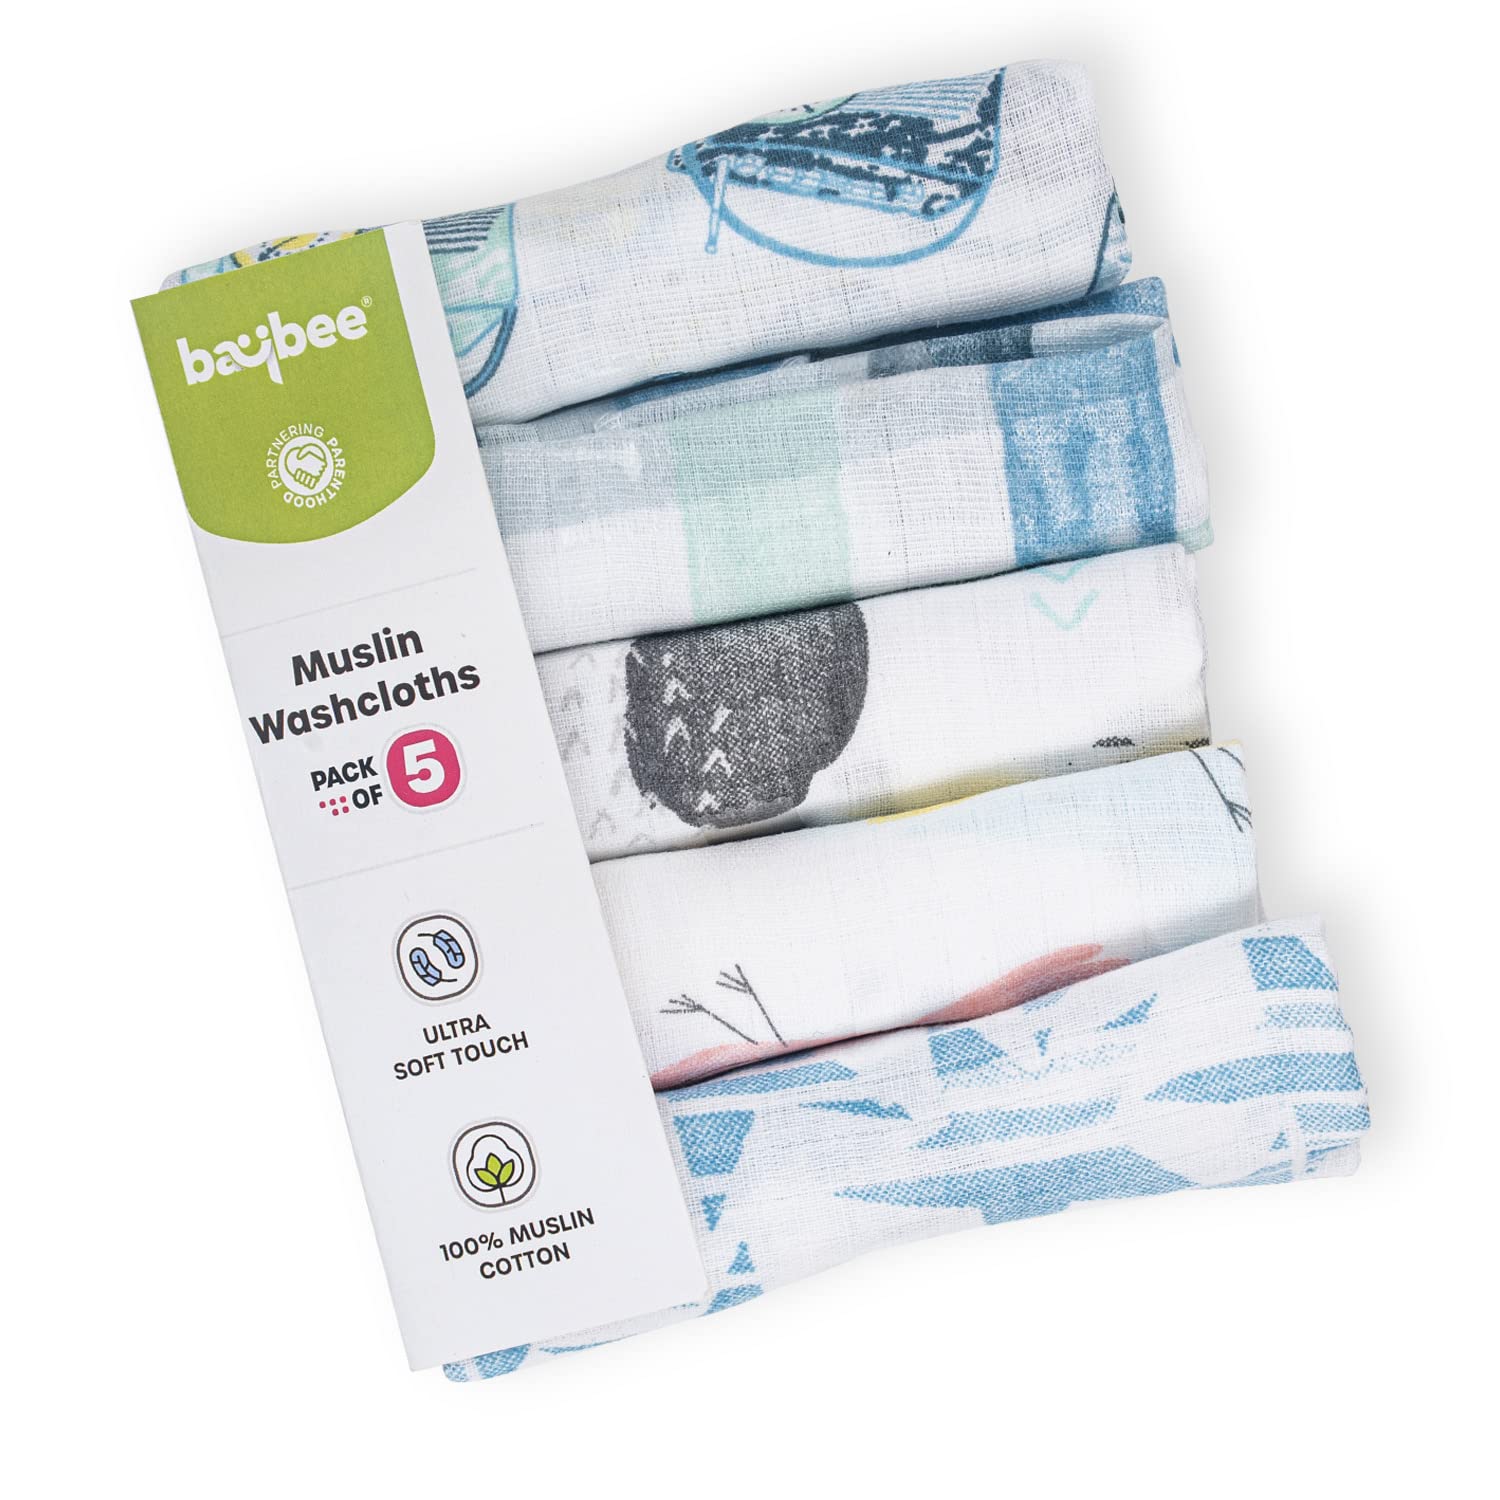 Baybee 100%  Cotton Muslin Baby Napkins Towel for New Born, Ultra-Soft & Absorbent Baby Napkins